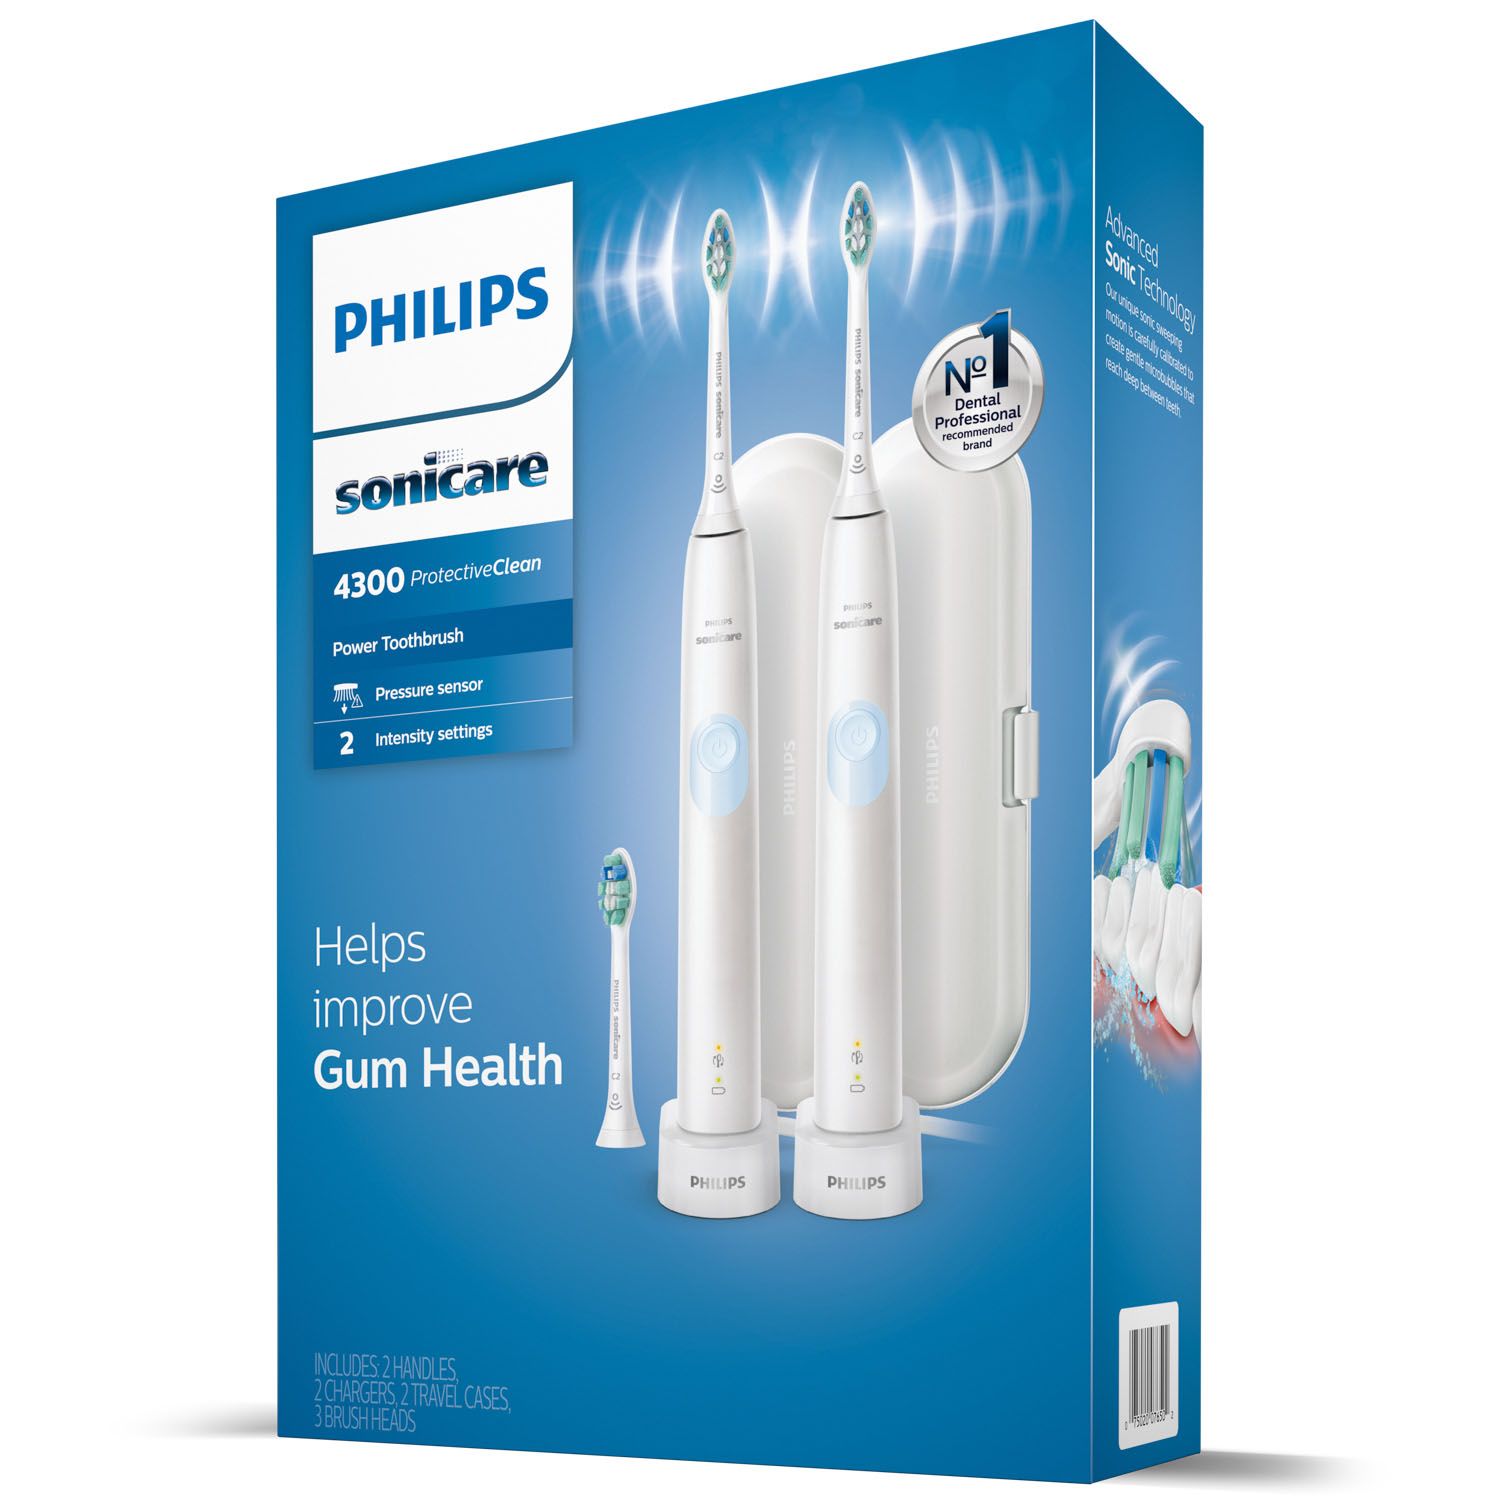 Philips Sonicare ProtectiveClean 4300 Rechargeable Toothbrush – 2 Pack